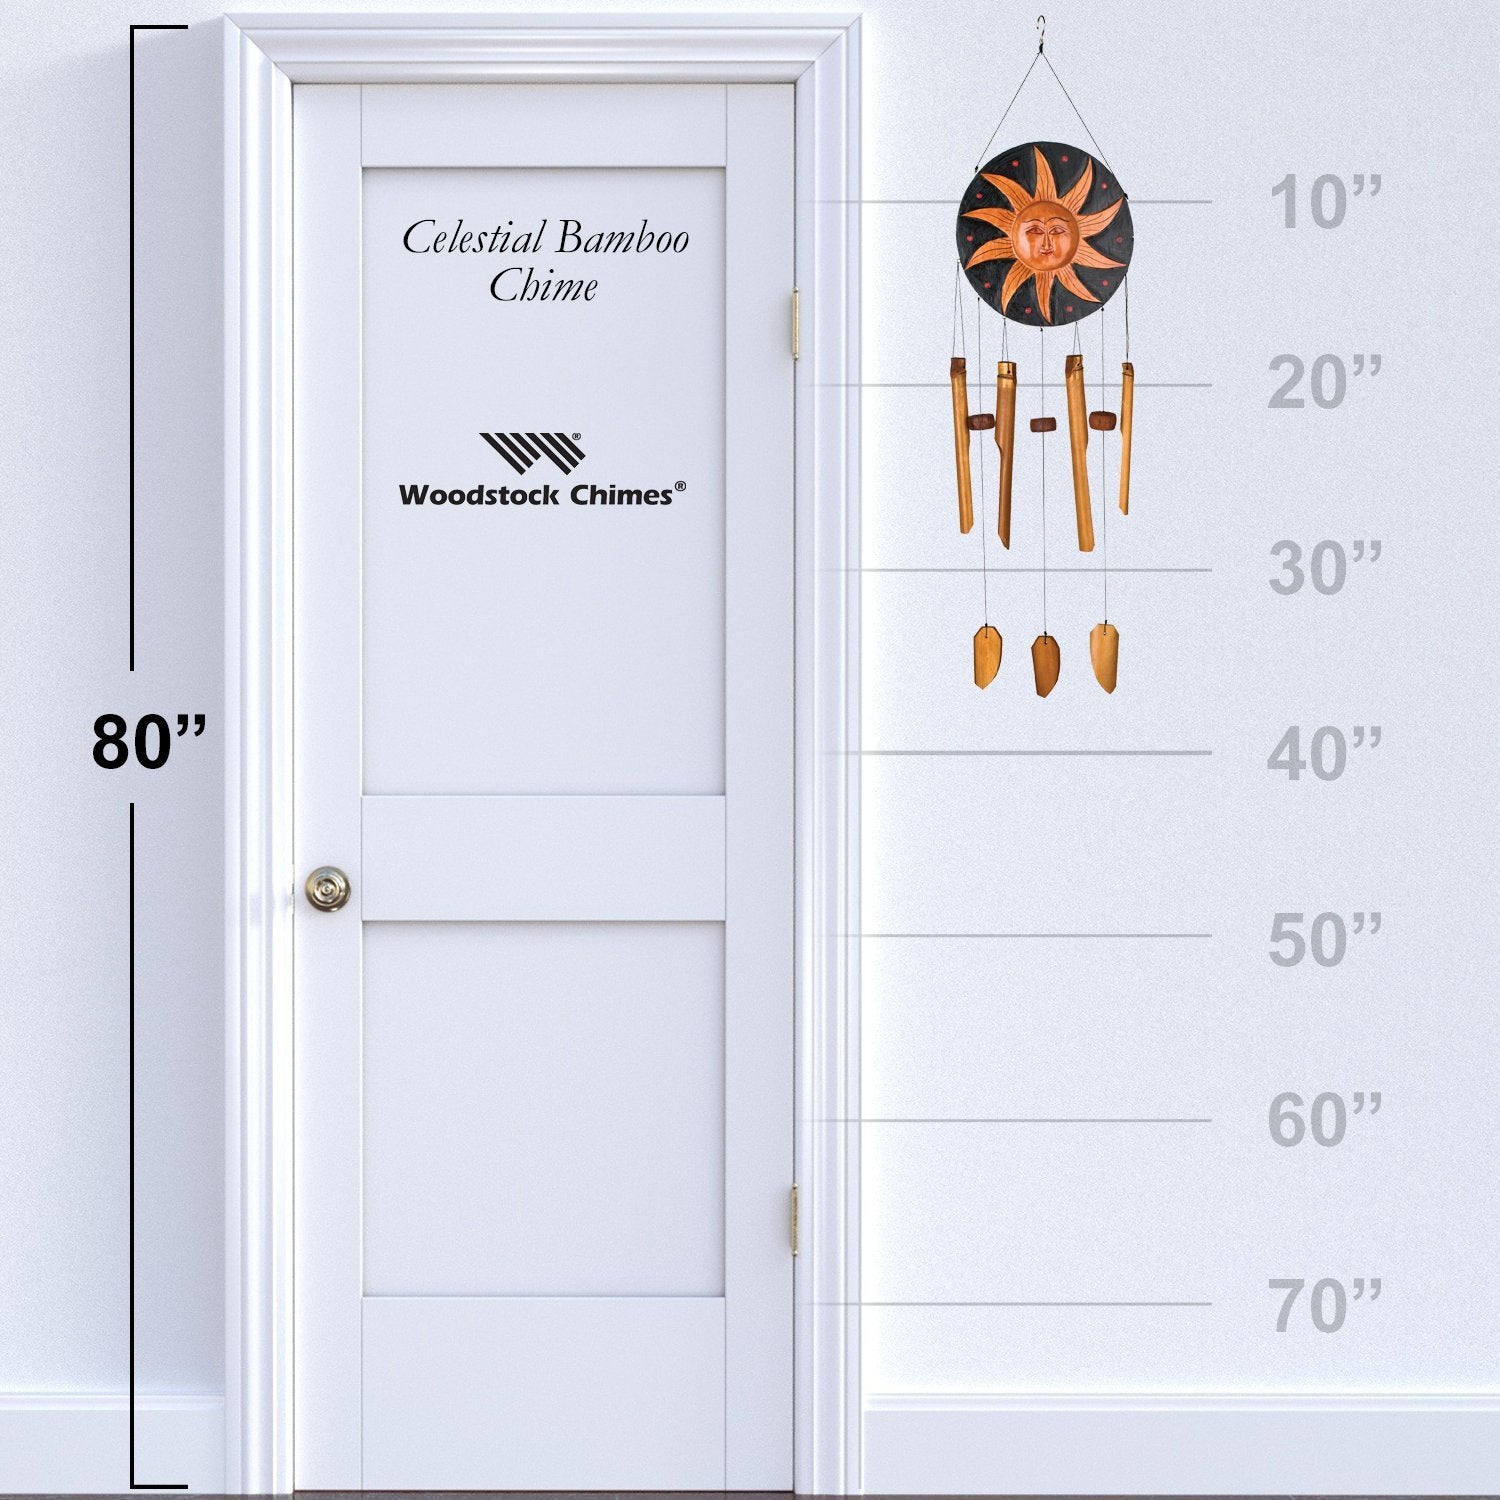 Celestial Bamboo Chime proportion image